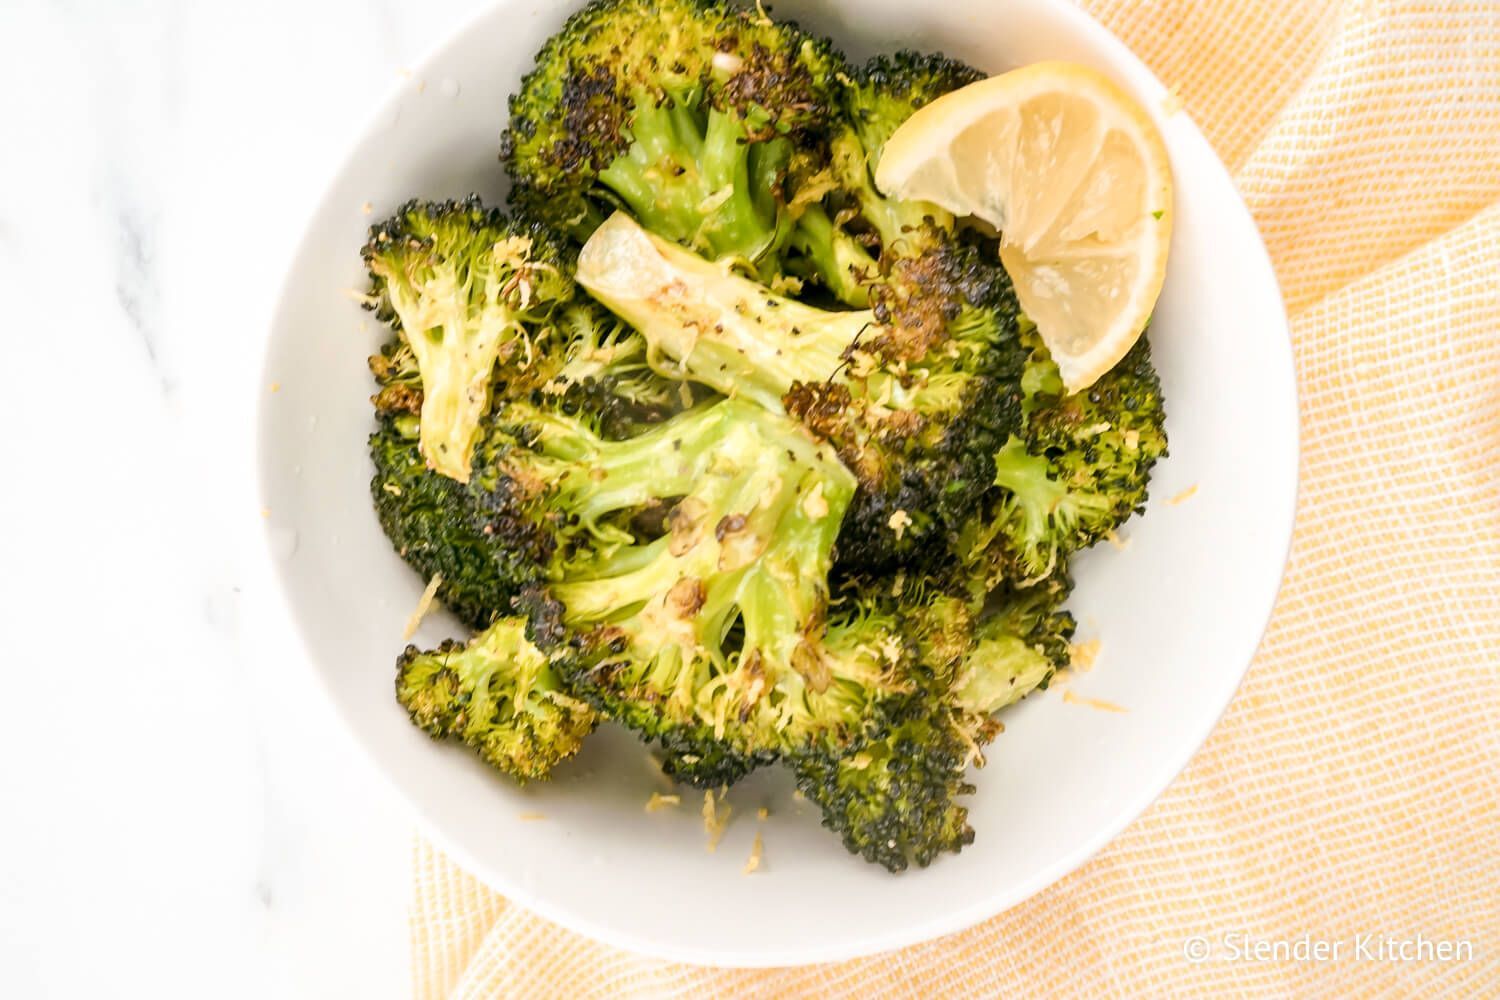 Baked broccoli with garlic and lemon in a bowl.